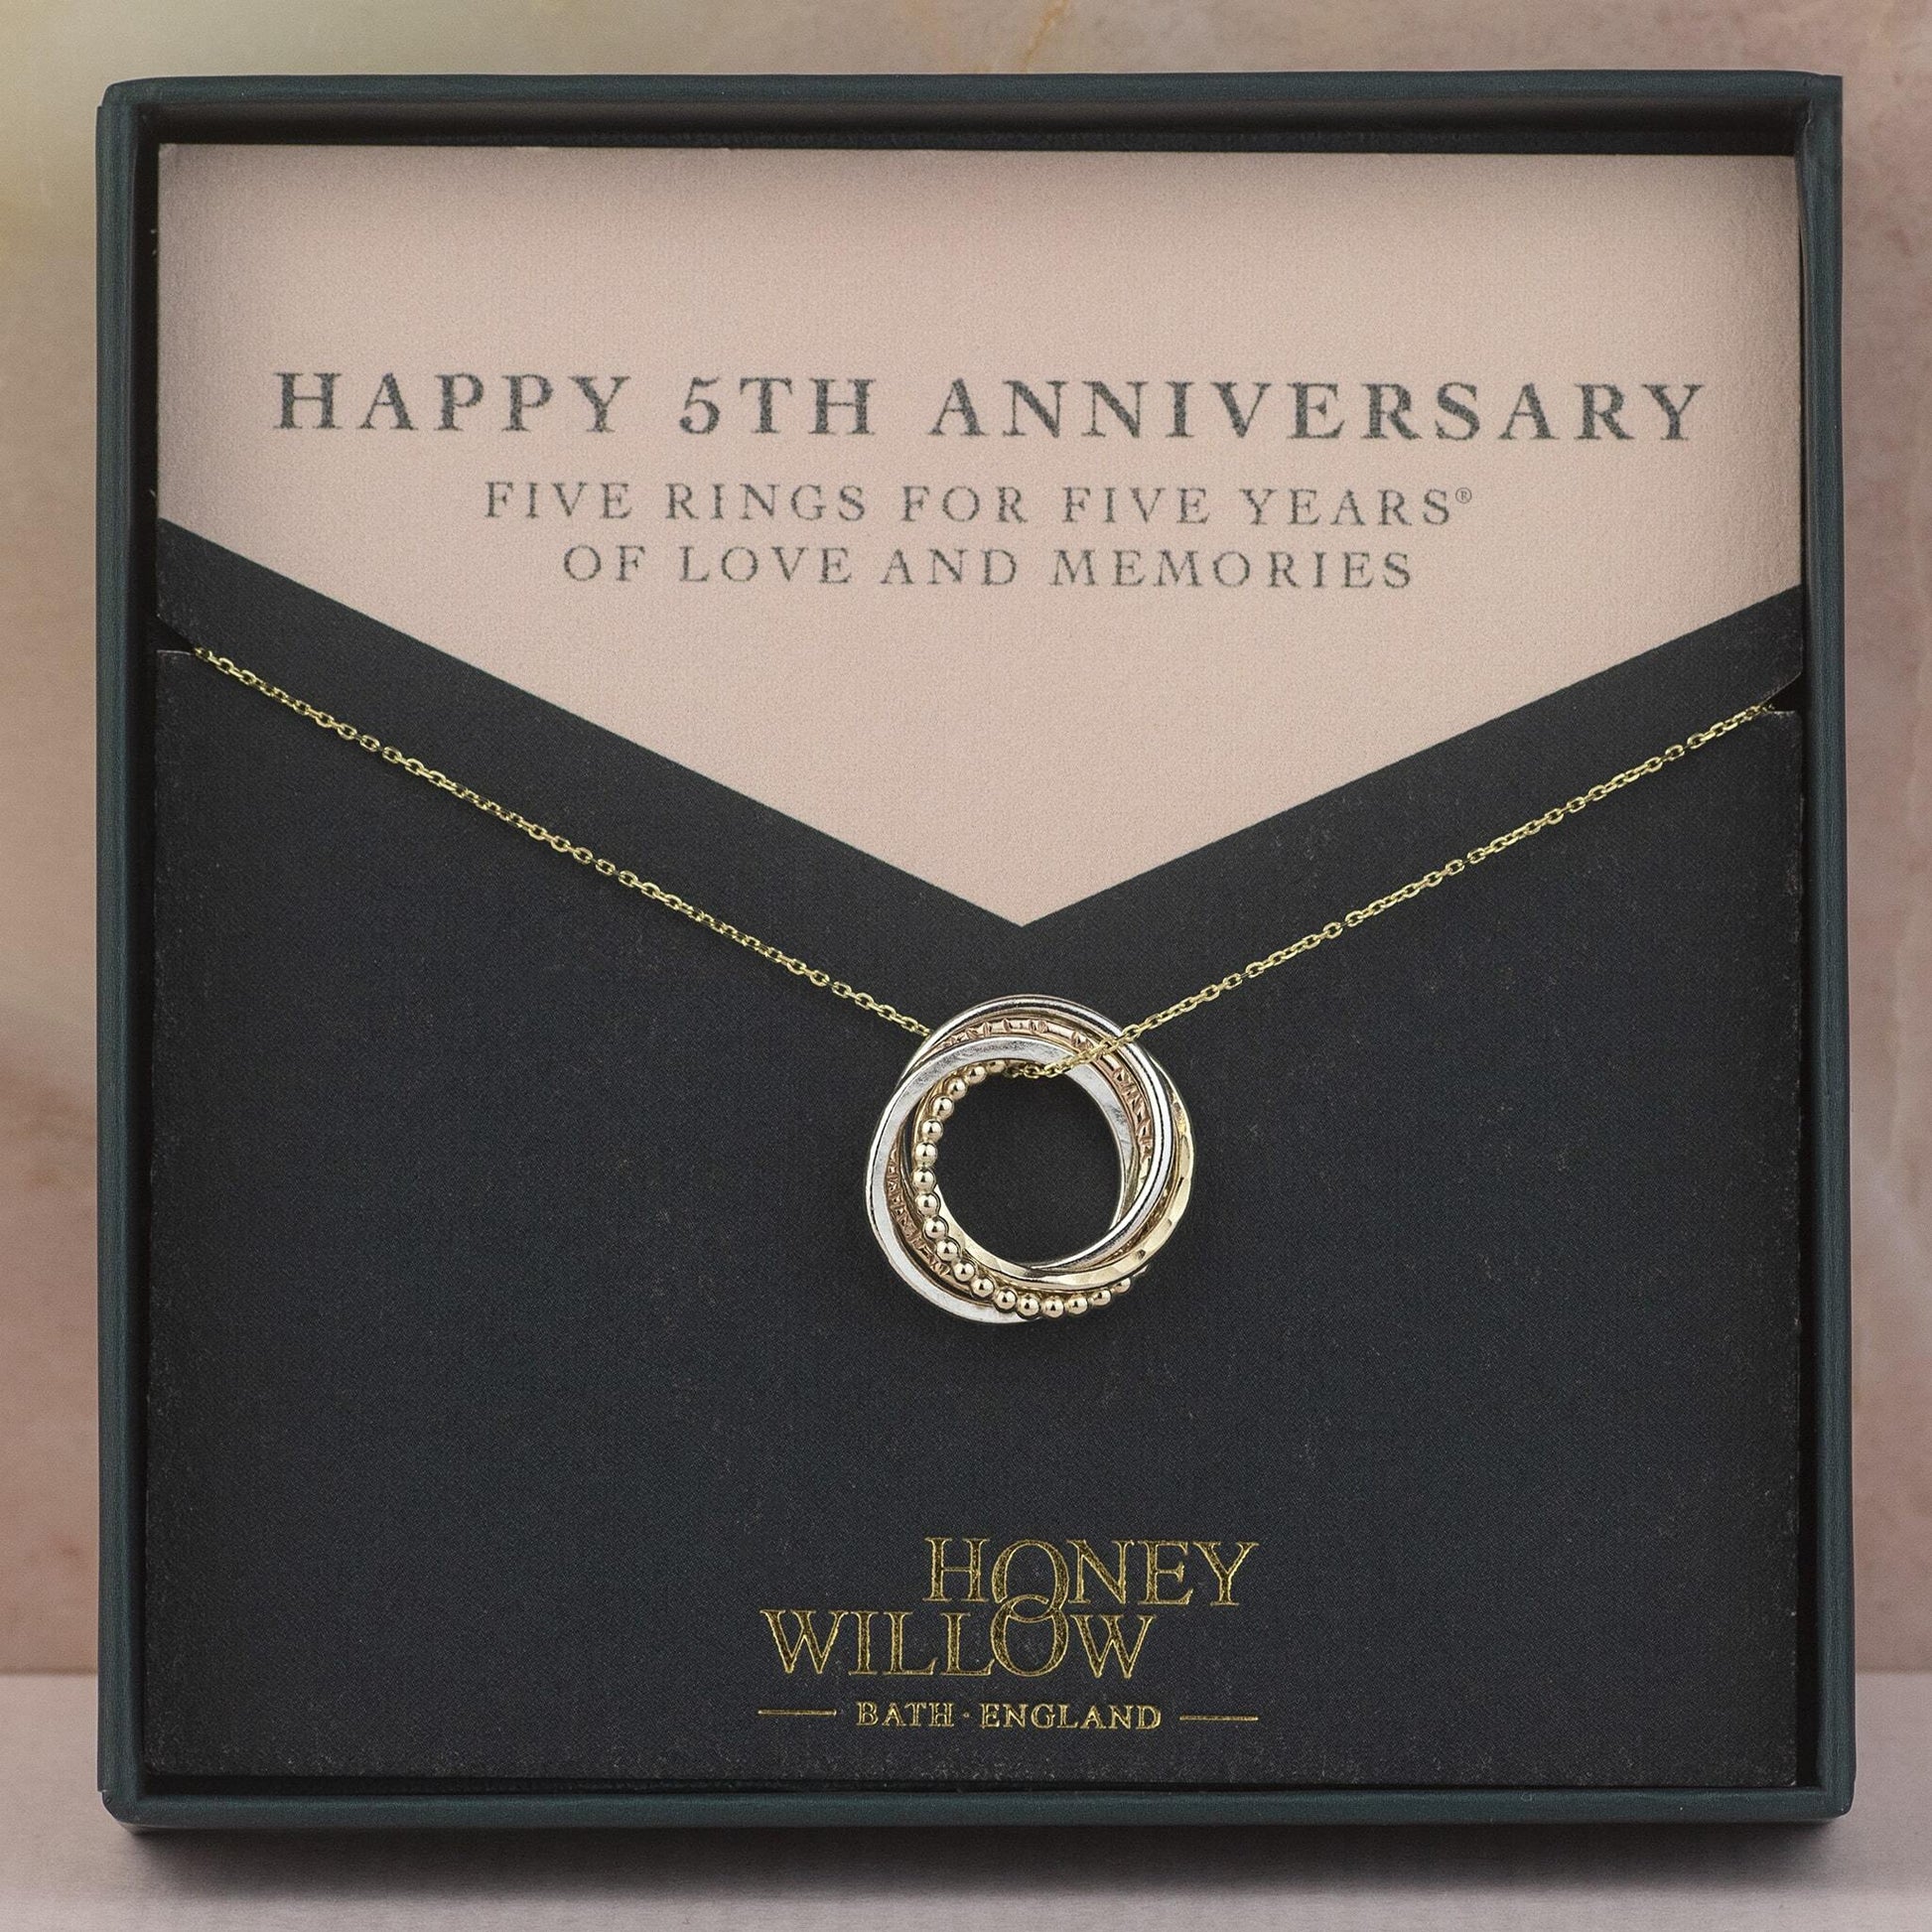 9kt Gold 5th Anniversary Necklace -  The Original 5 Links for 5 Years Necklace - Petite Recycled Gold, Rose Gold & Silver